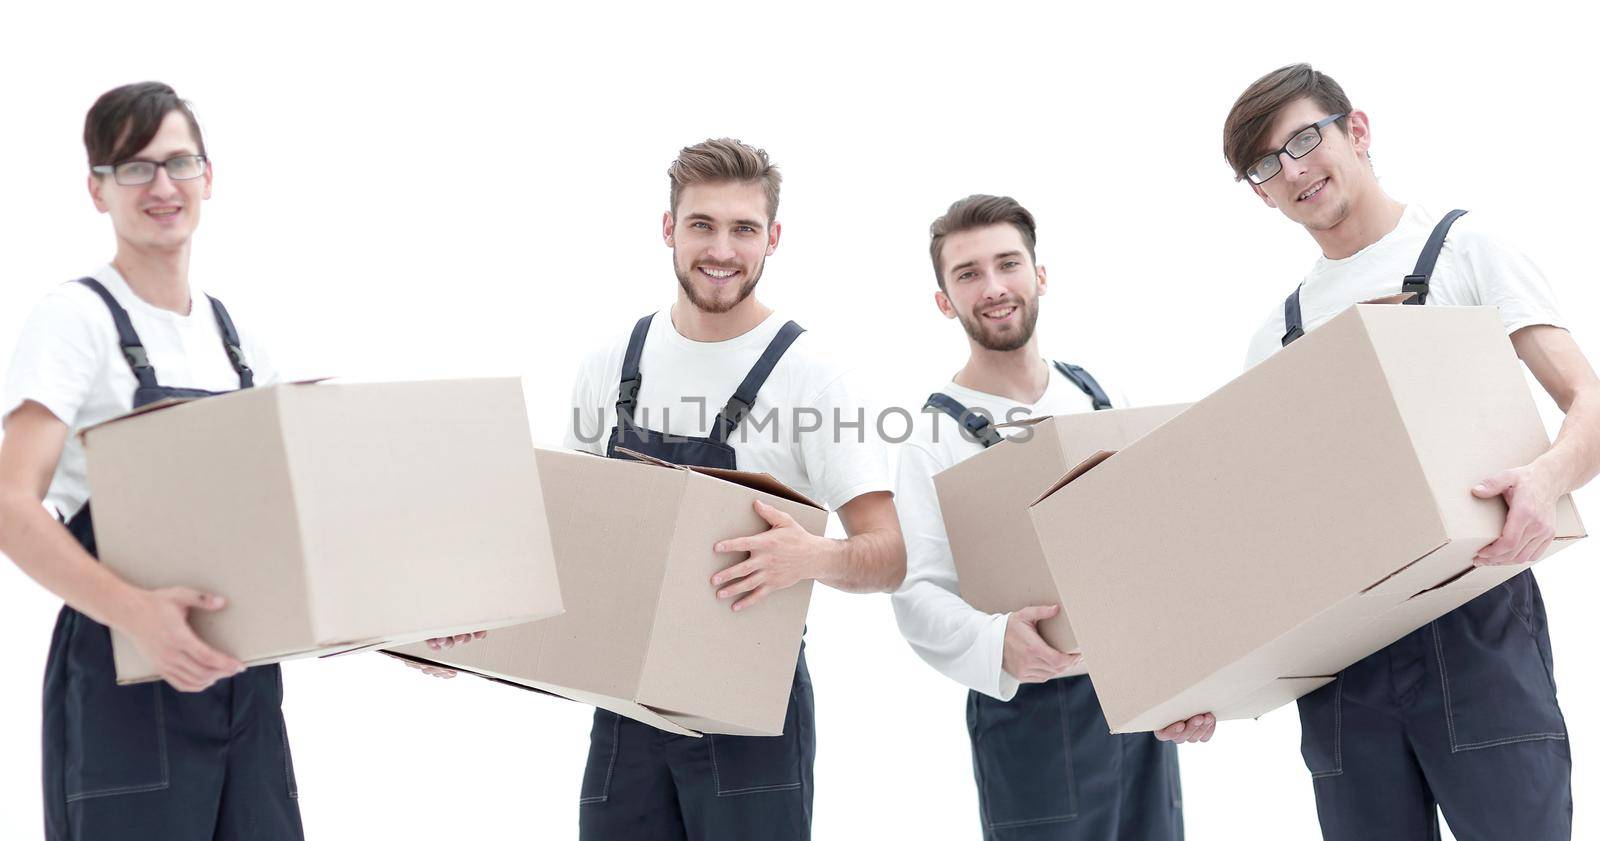 Young movers holding boxes. Delivering and transportation concept.